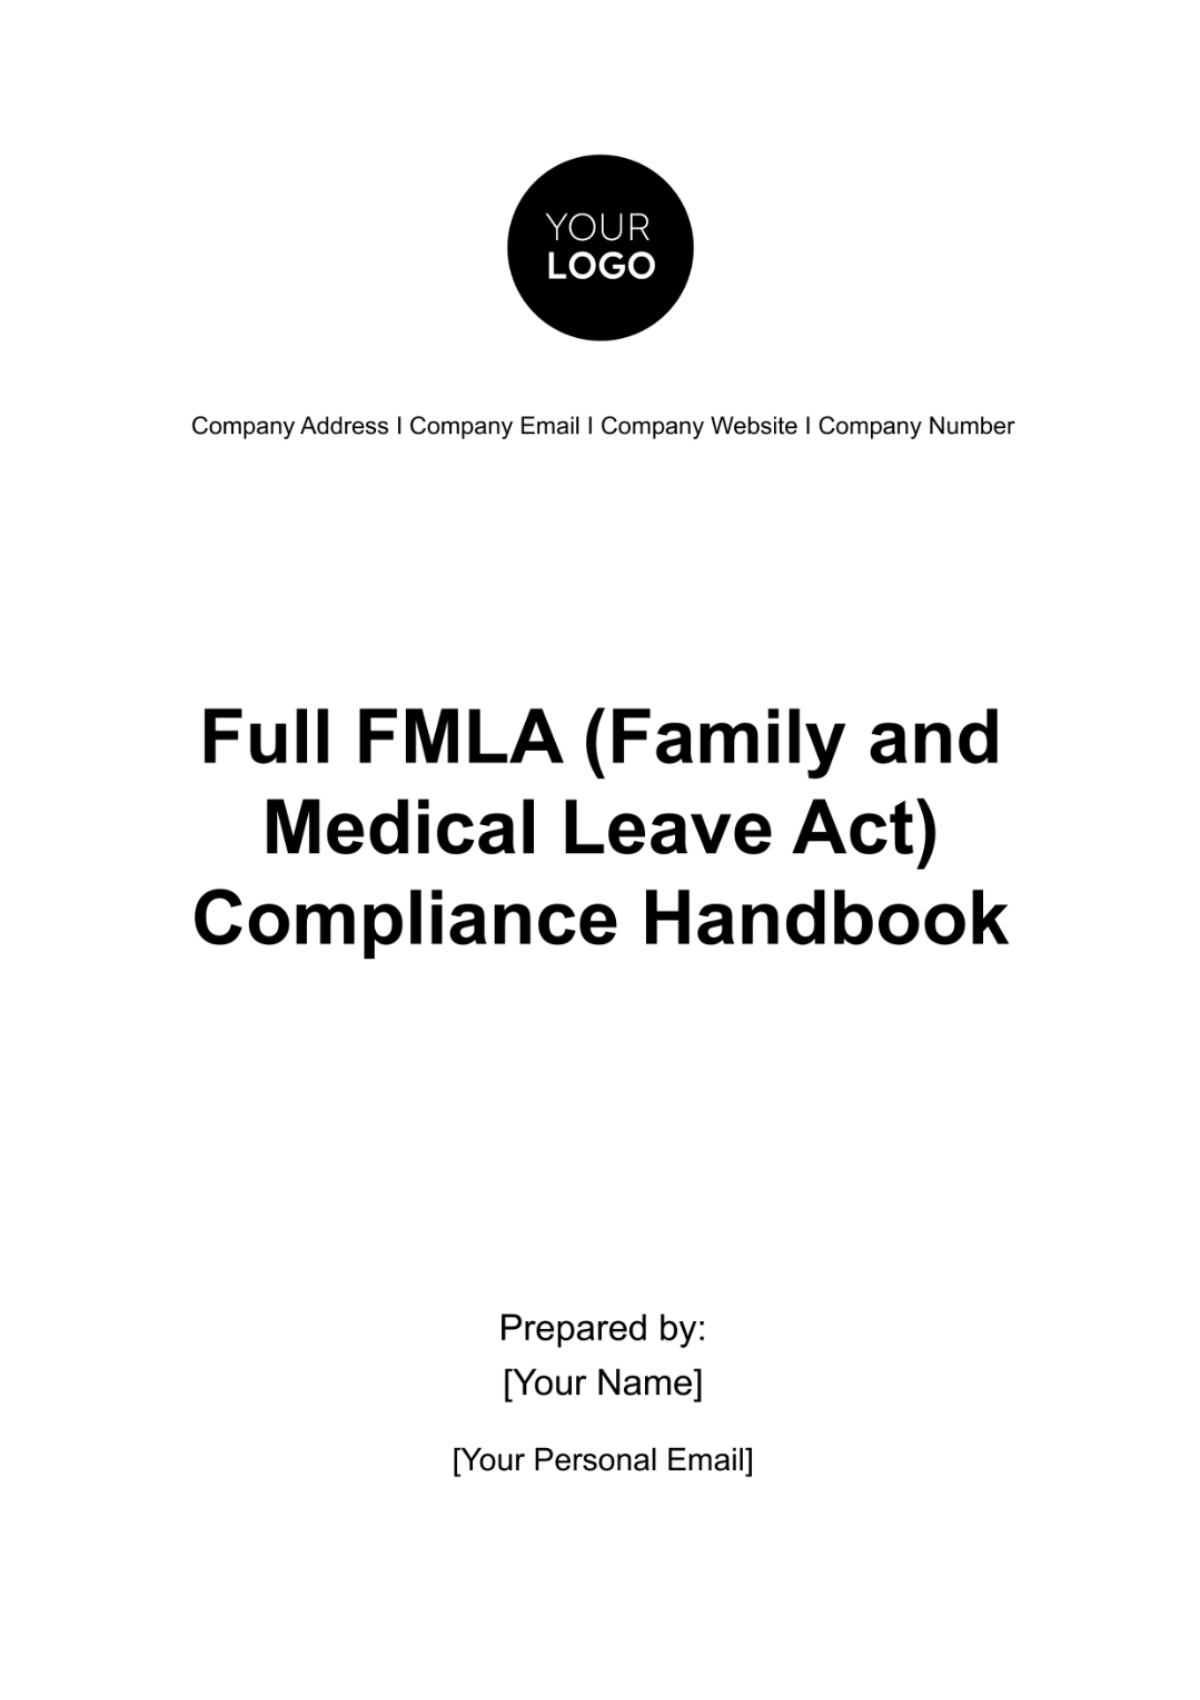 Full FMLA (Family and Medical Leave Act) Compliance Handbook HR Template